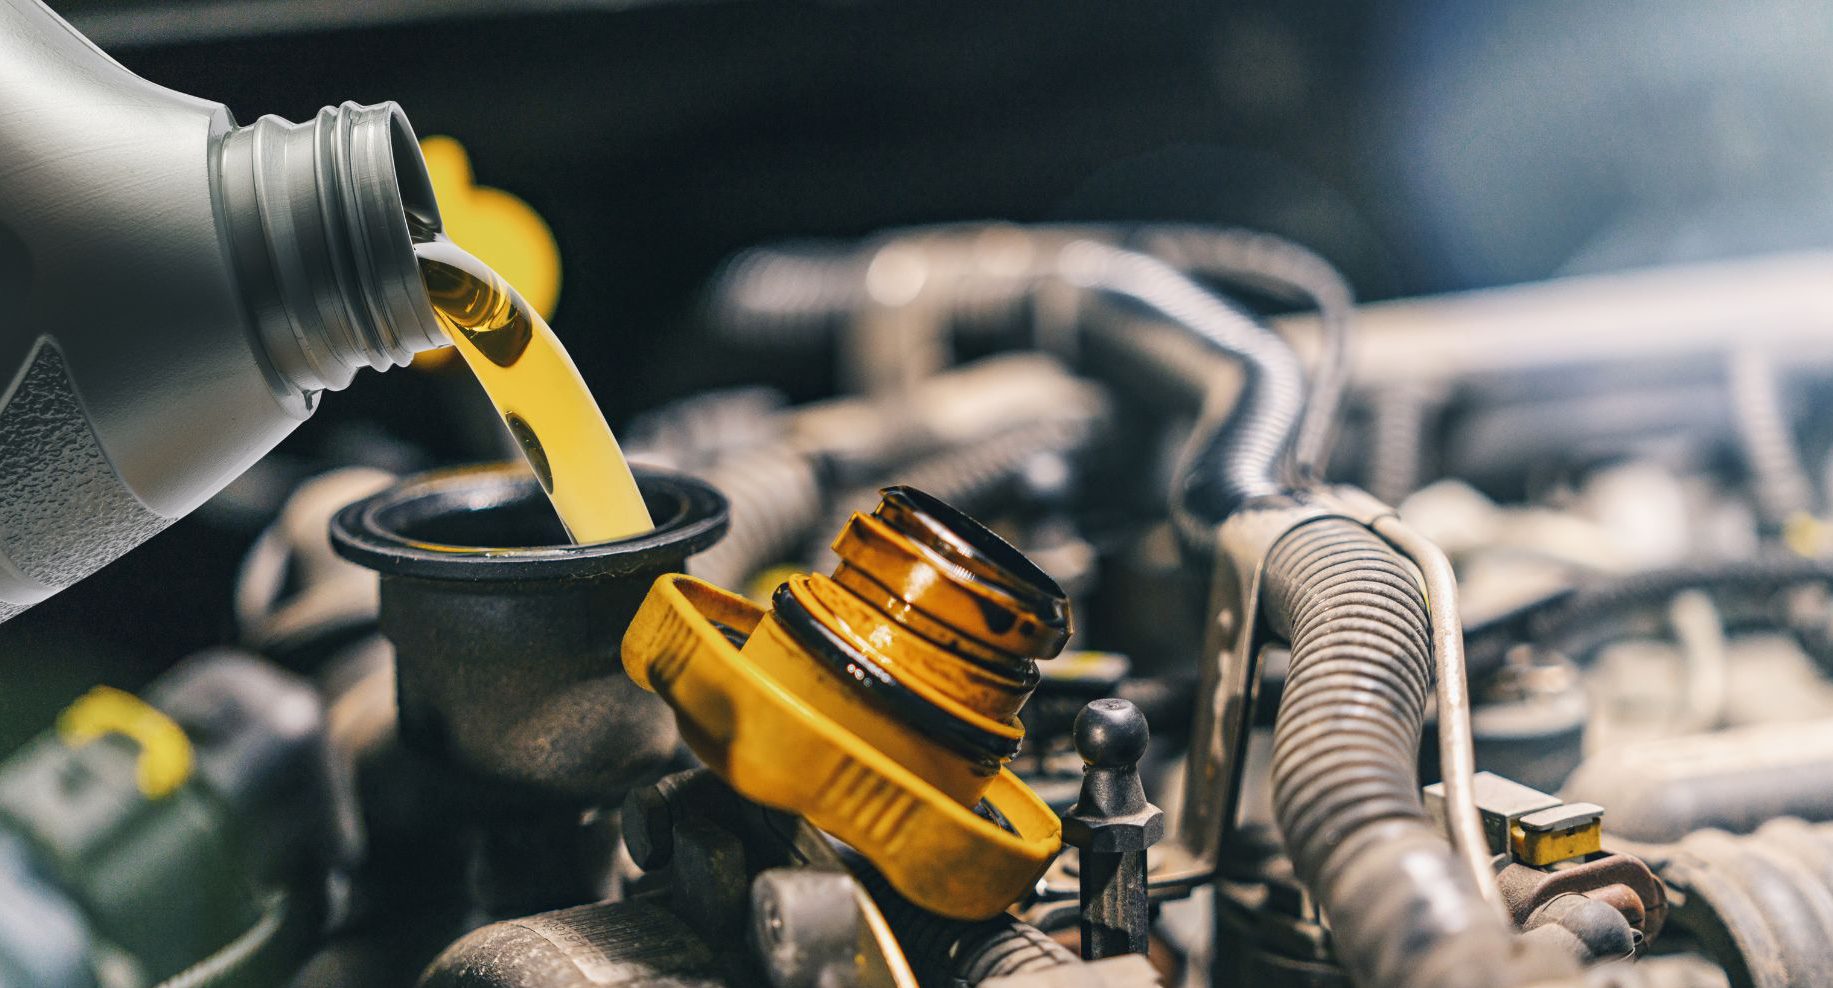 Global Automotive Engine Oil Market Outlook, Opportunities And Strategies – Includes Automotive Engine Oil Market Size